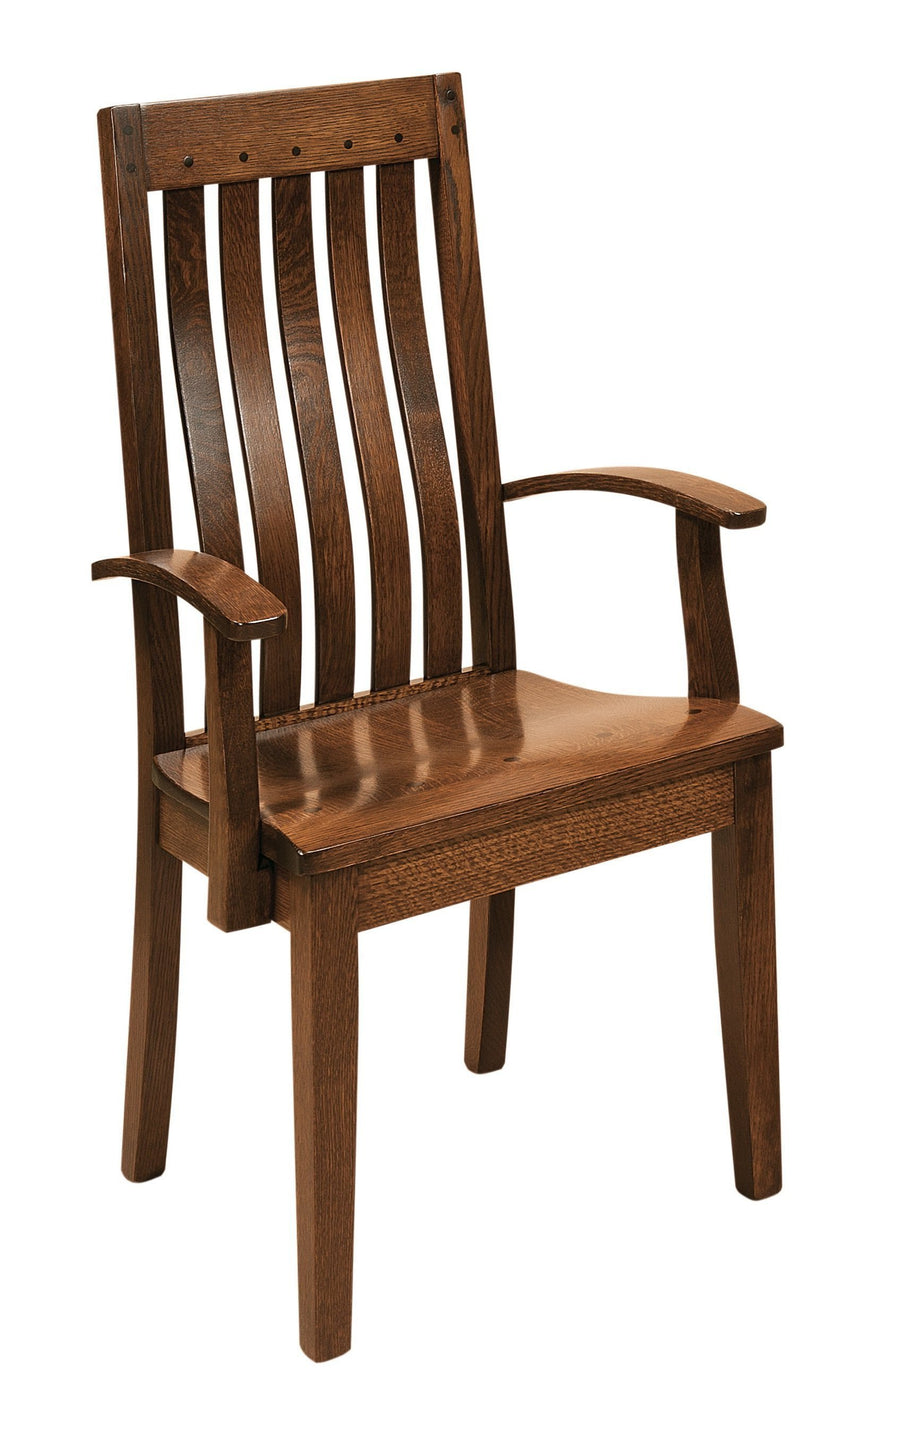 Fresno Amish Arm Chair - Foothills Amish Furniture